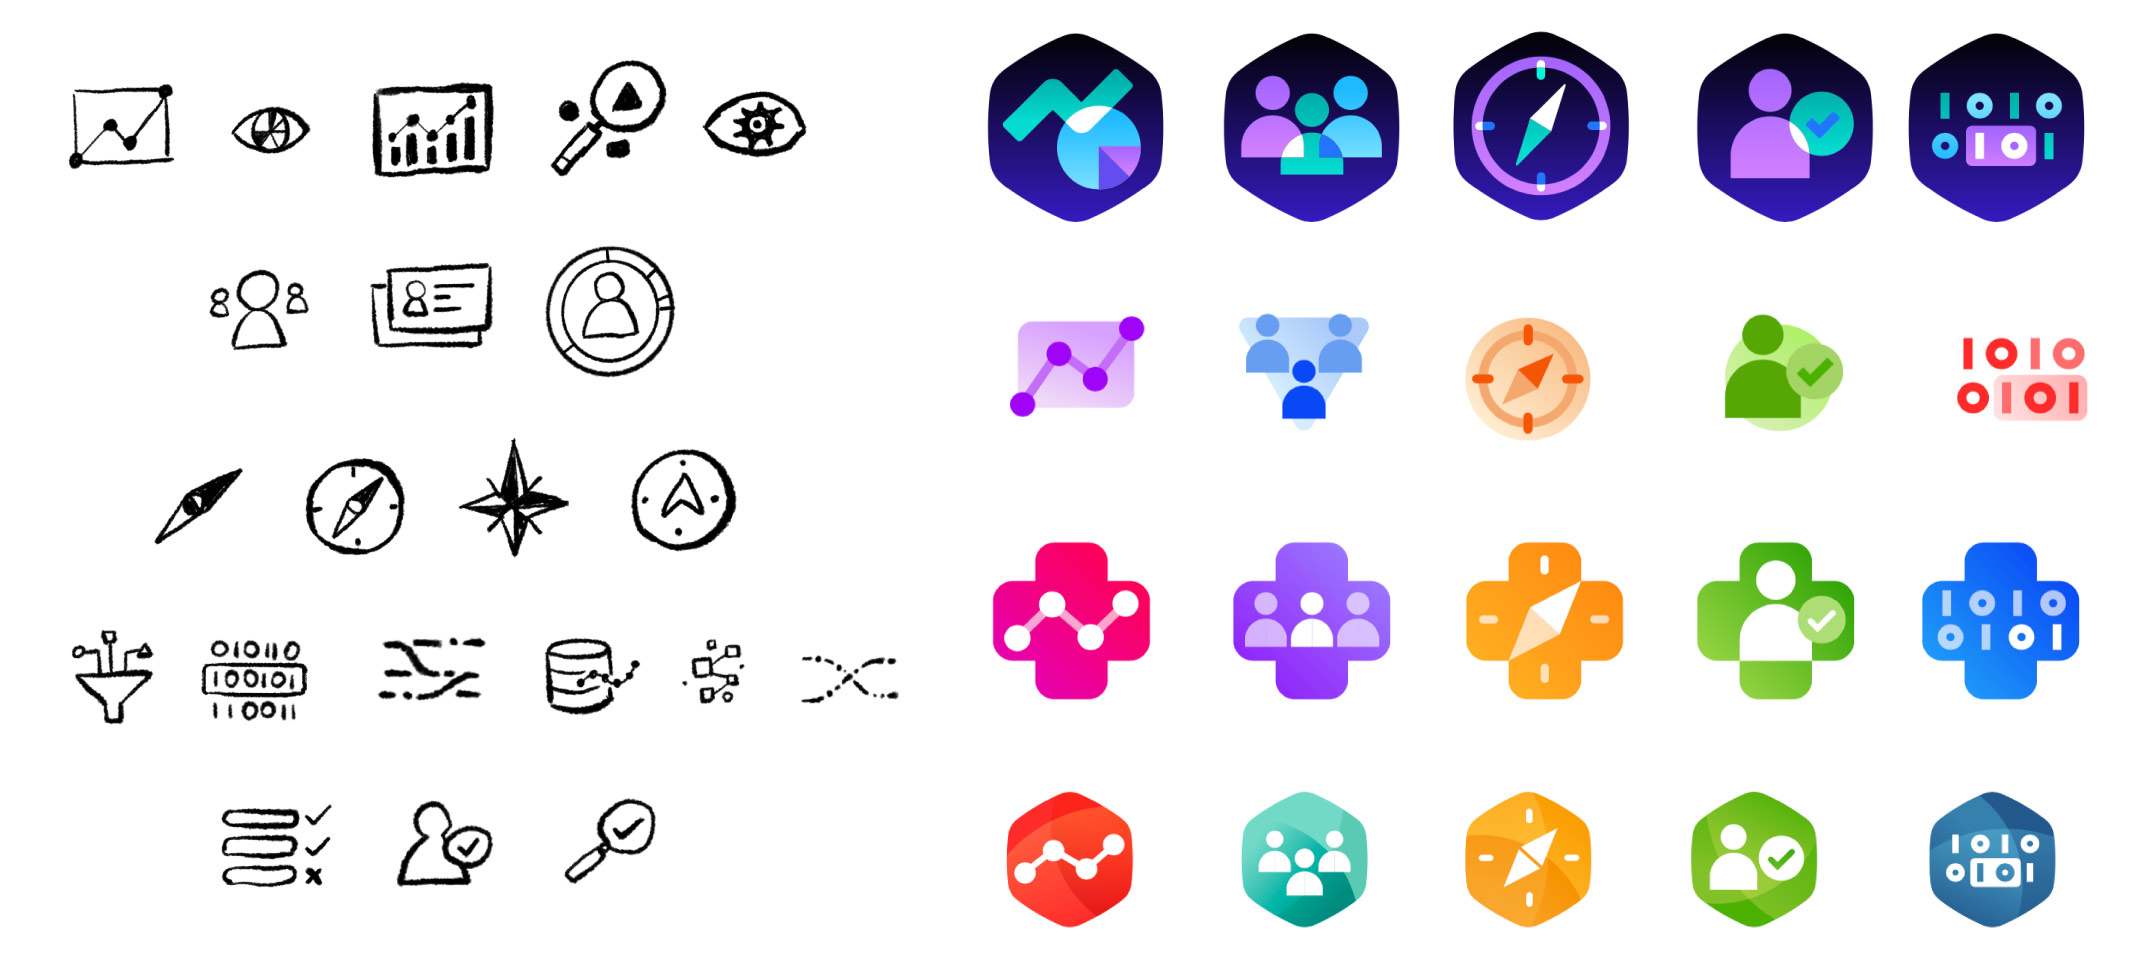 hstream_icons_exploration_d1